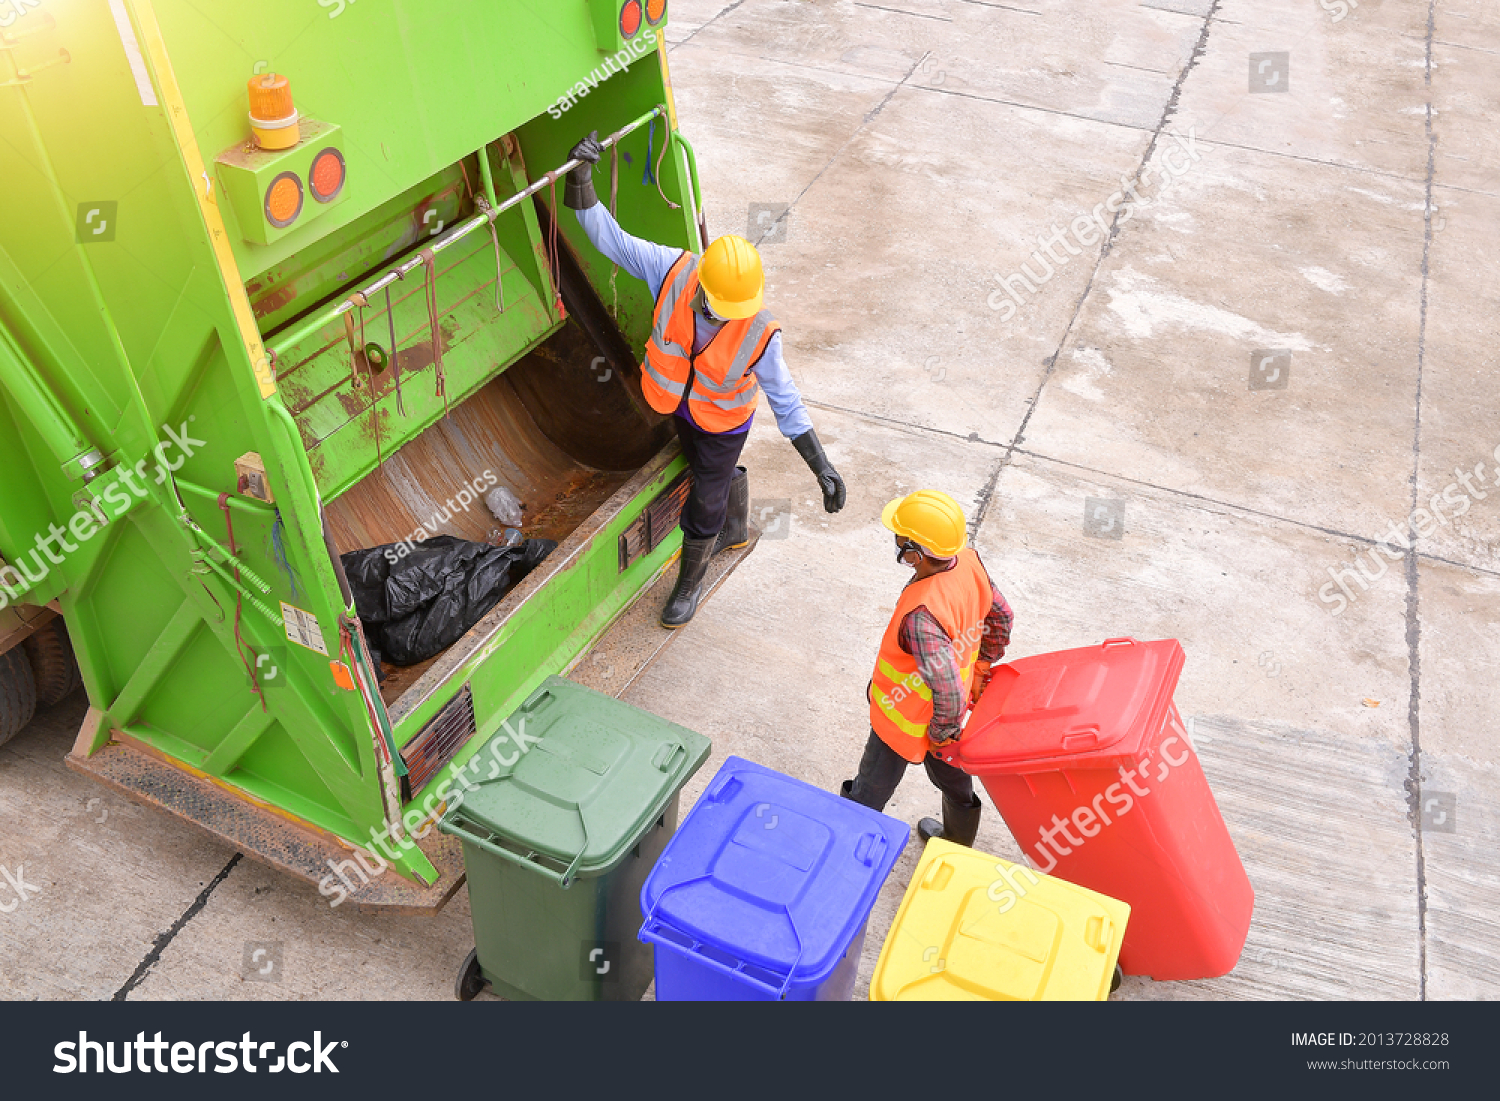 Workers collect garbage with Garbage collection truck,Garbage collection workers in residential area #2013728828